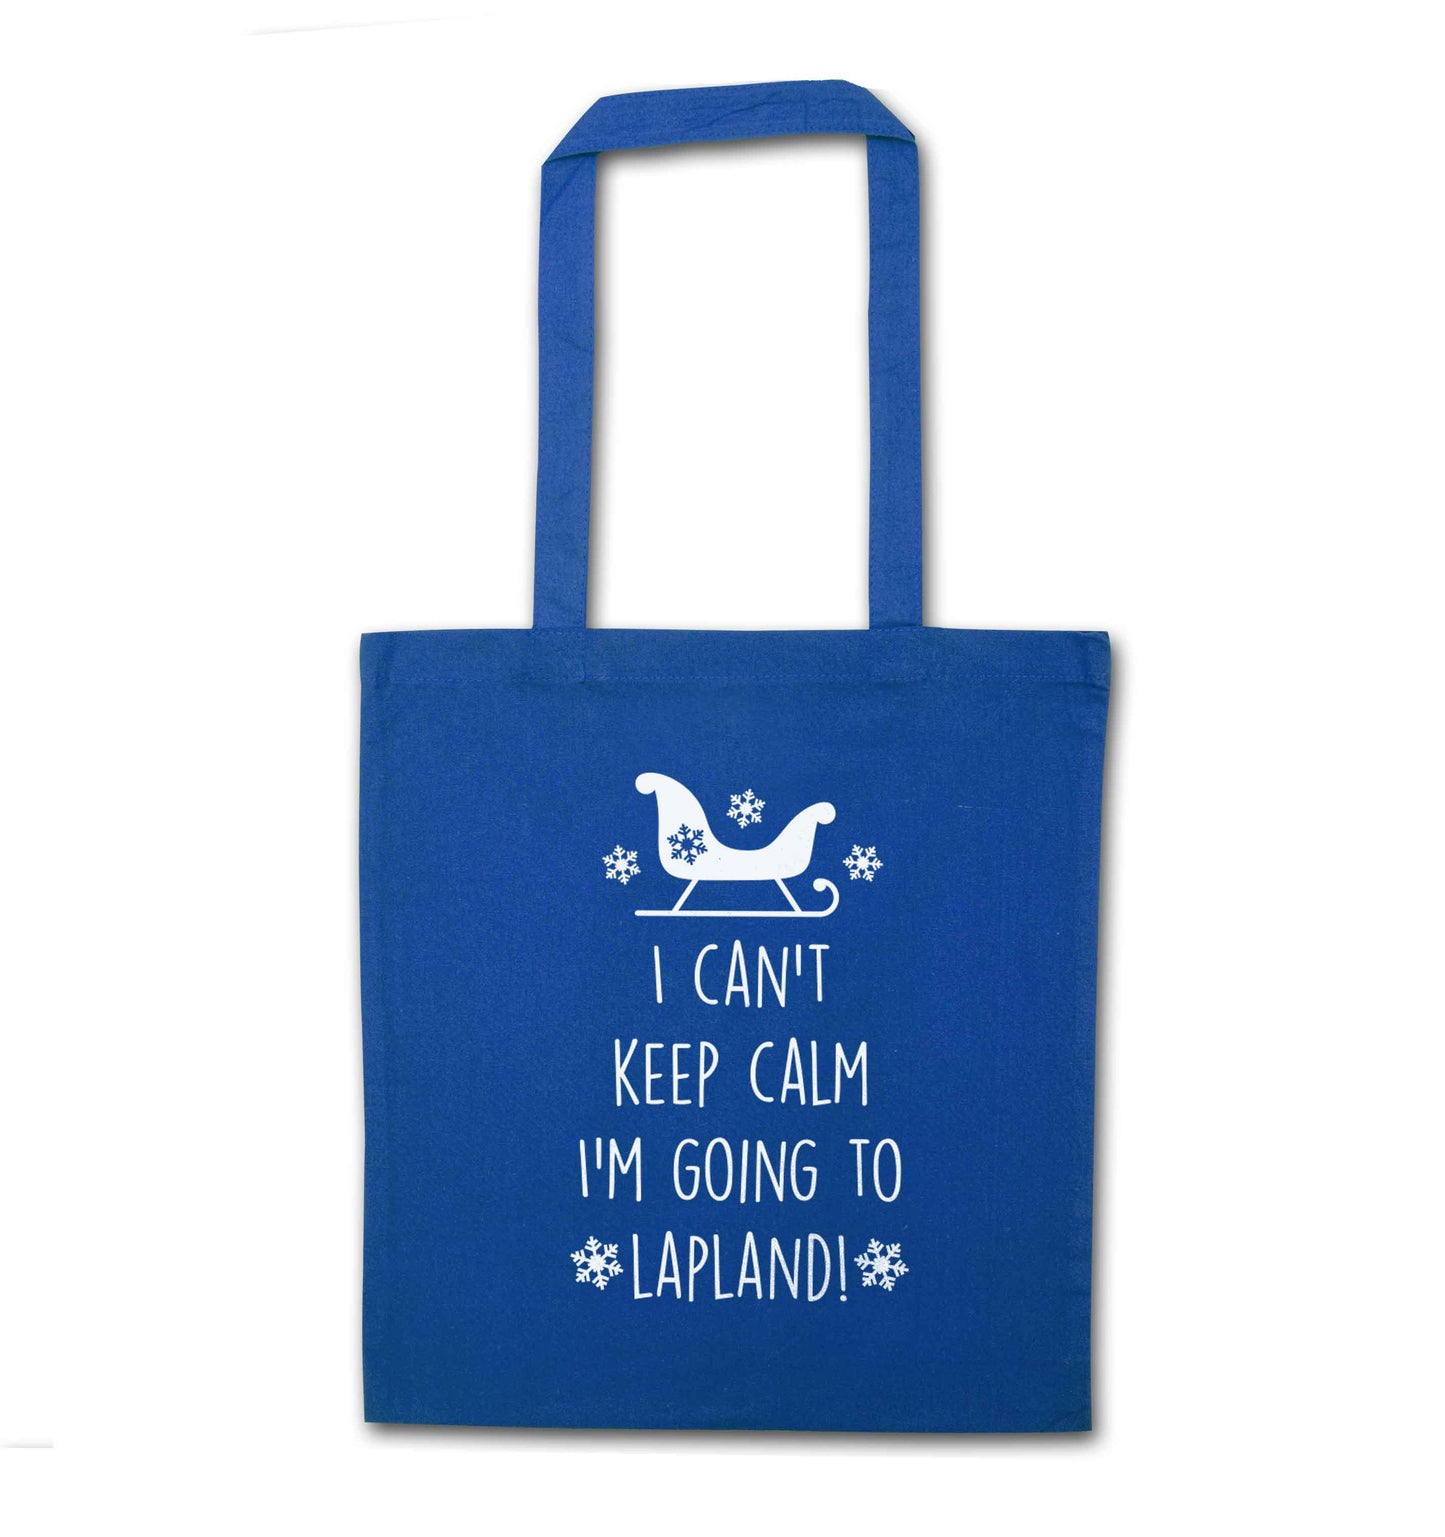 I can't keep calm I'm going to Lapland blue tote bag